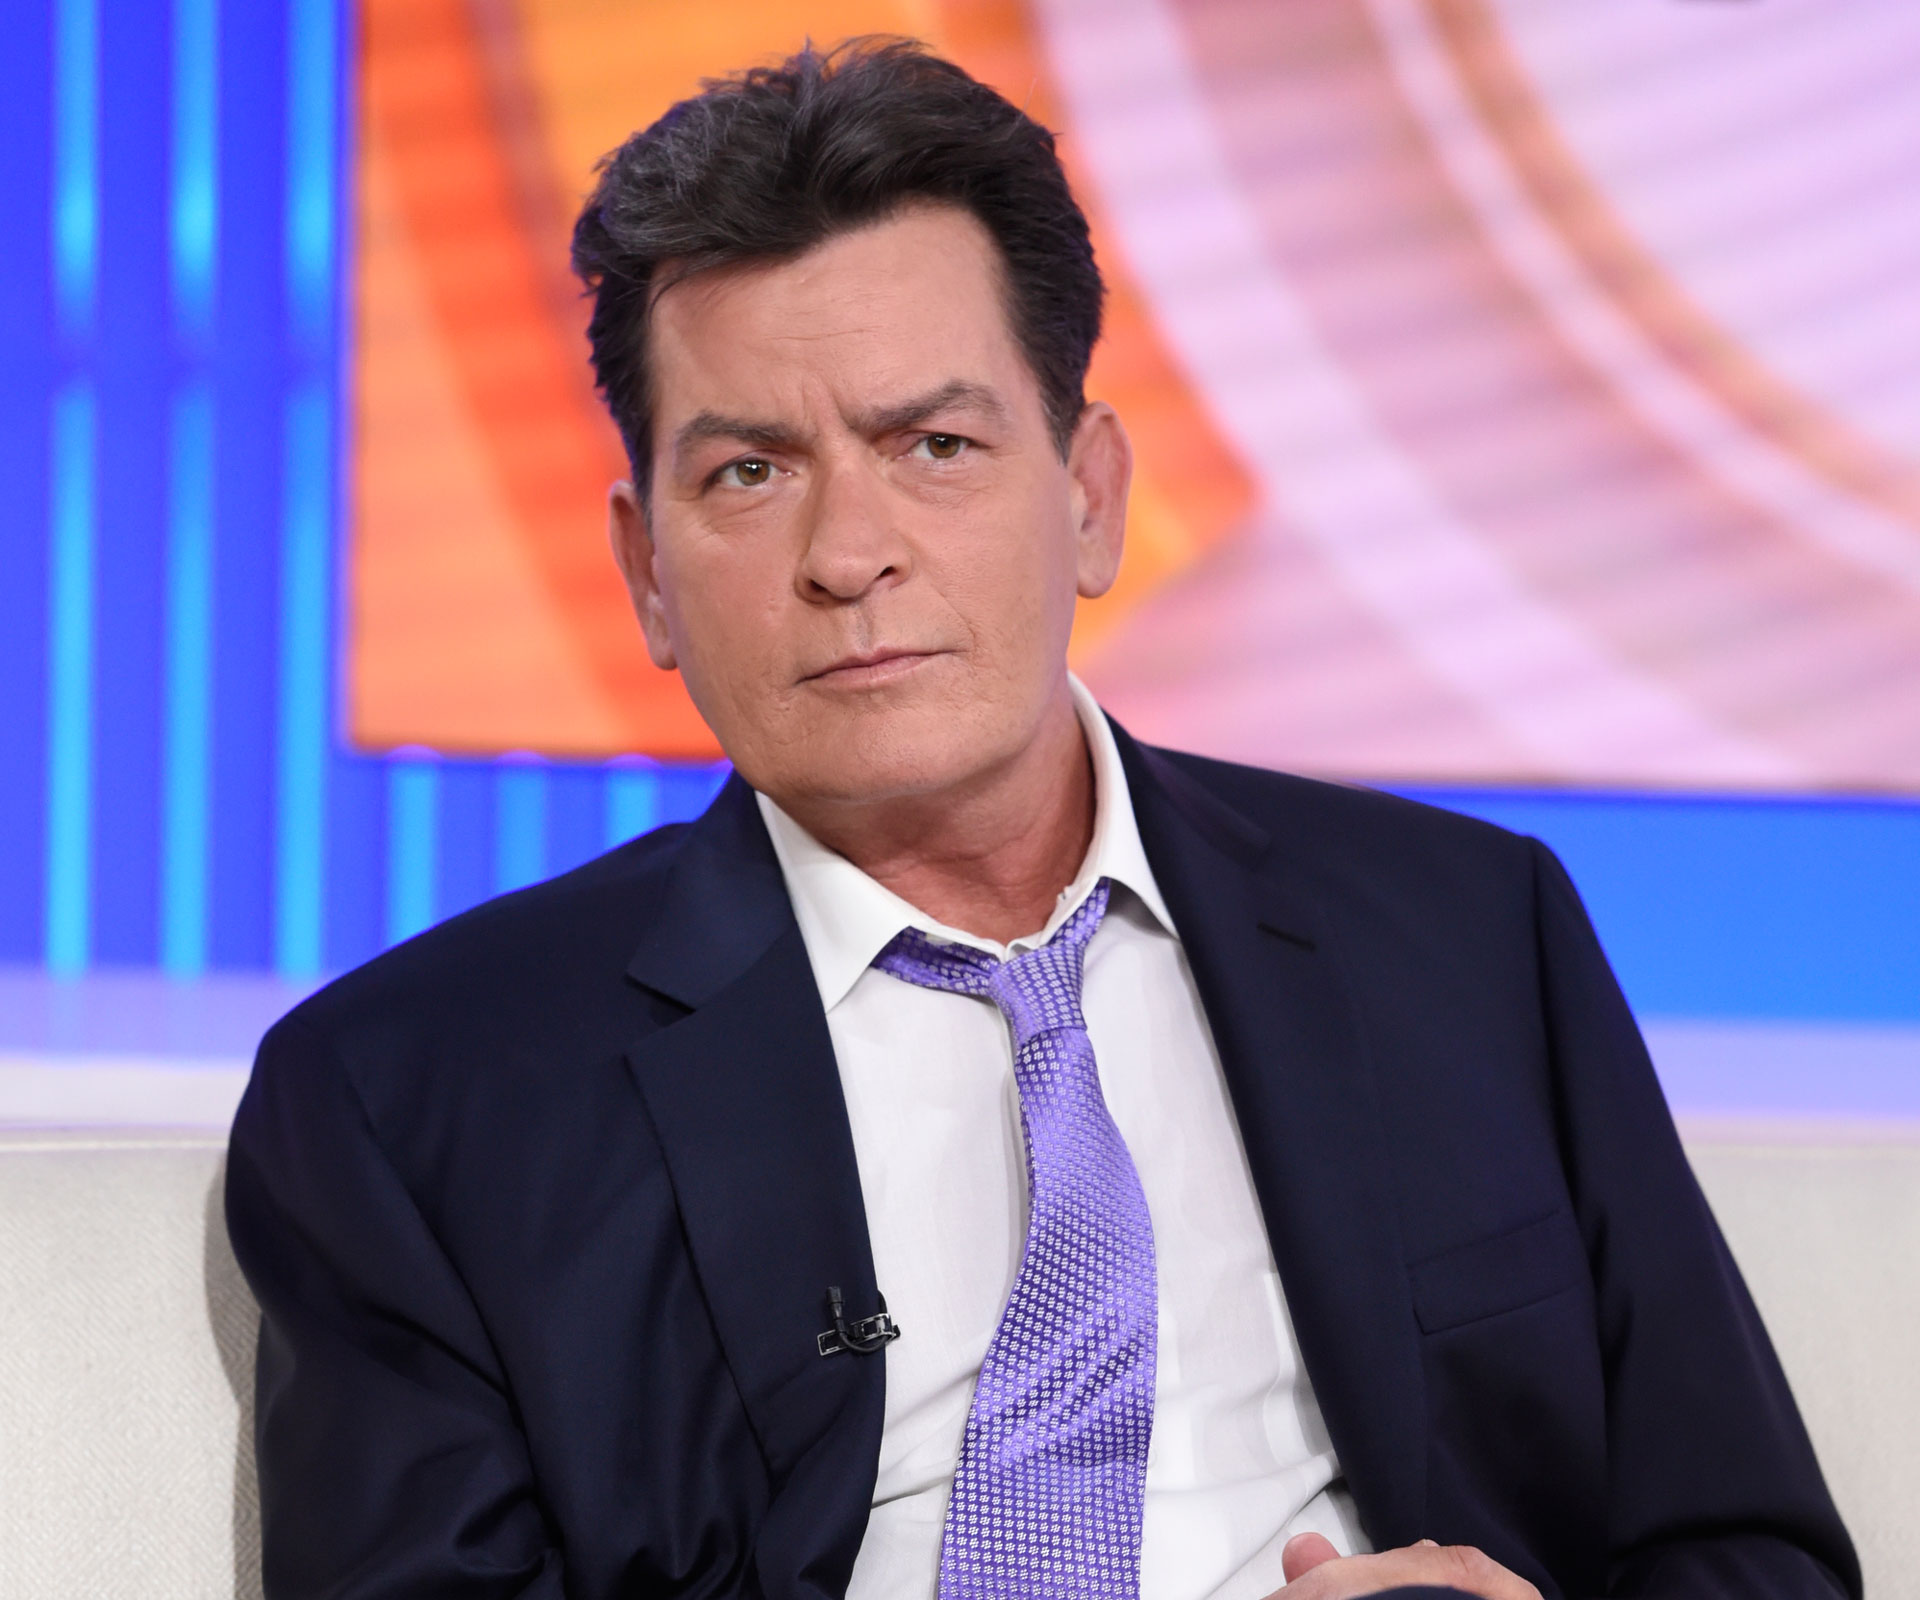 Charlie Sheen on the Today show